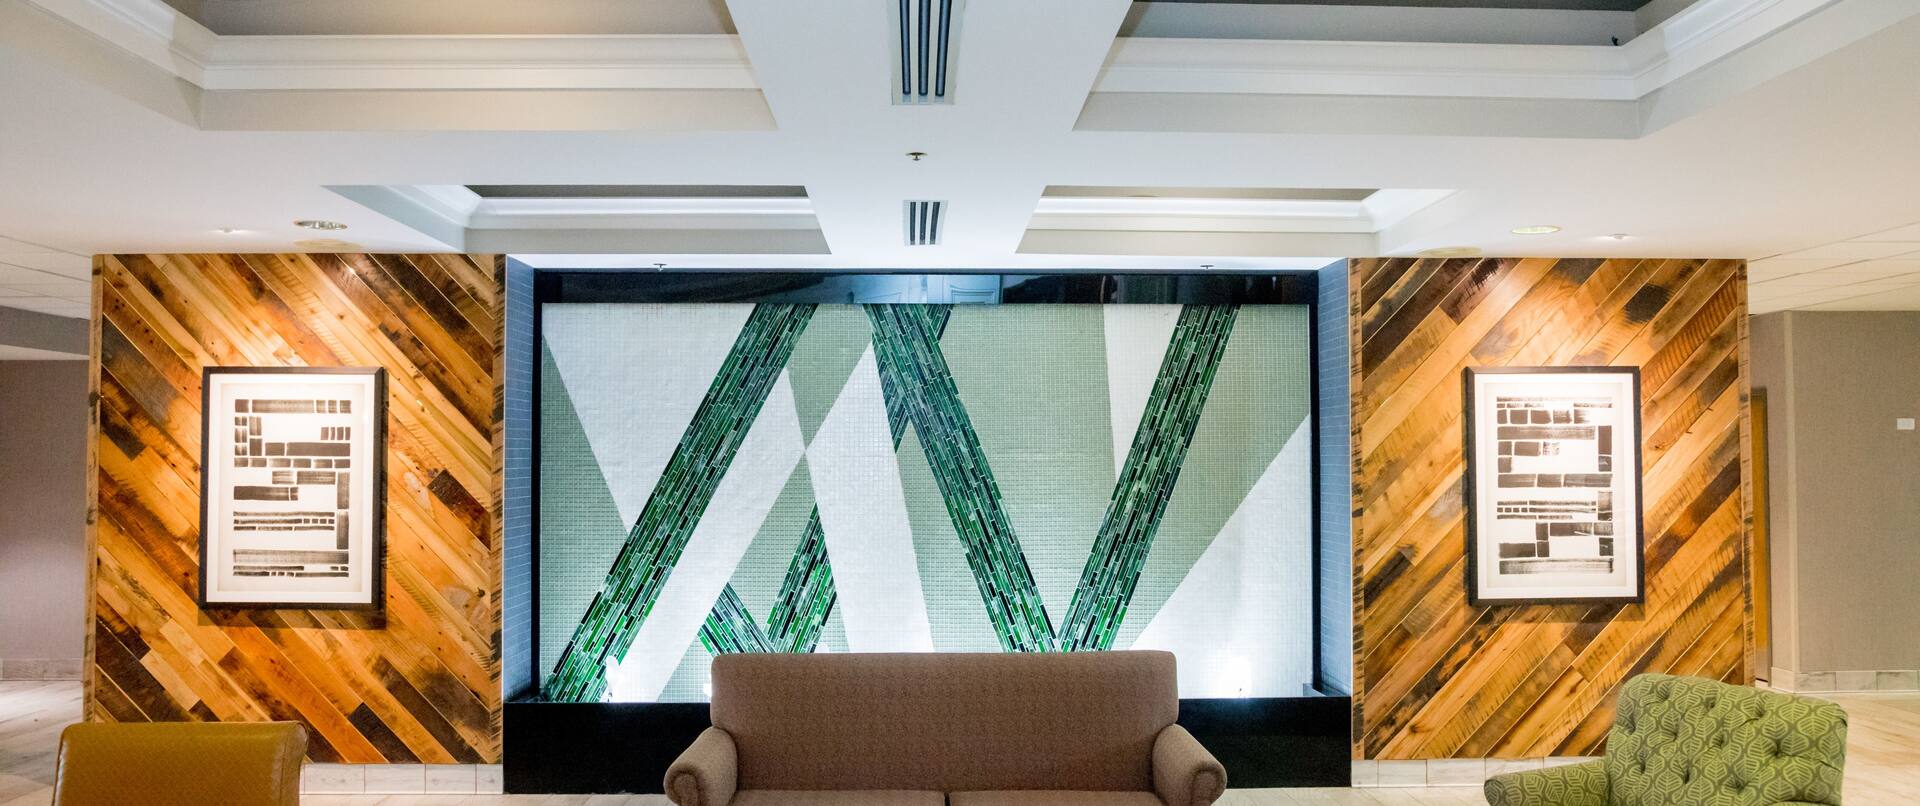 Lobby Seating Area with Wall Fountain